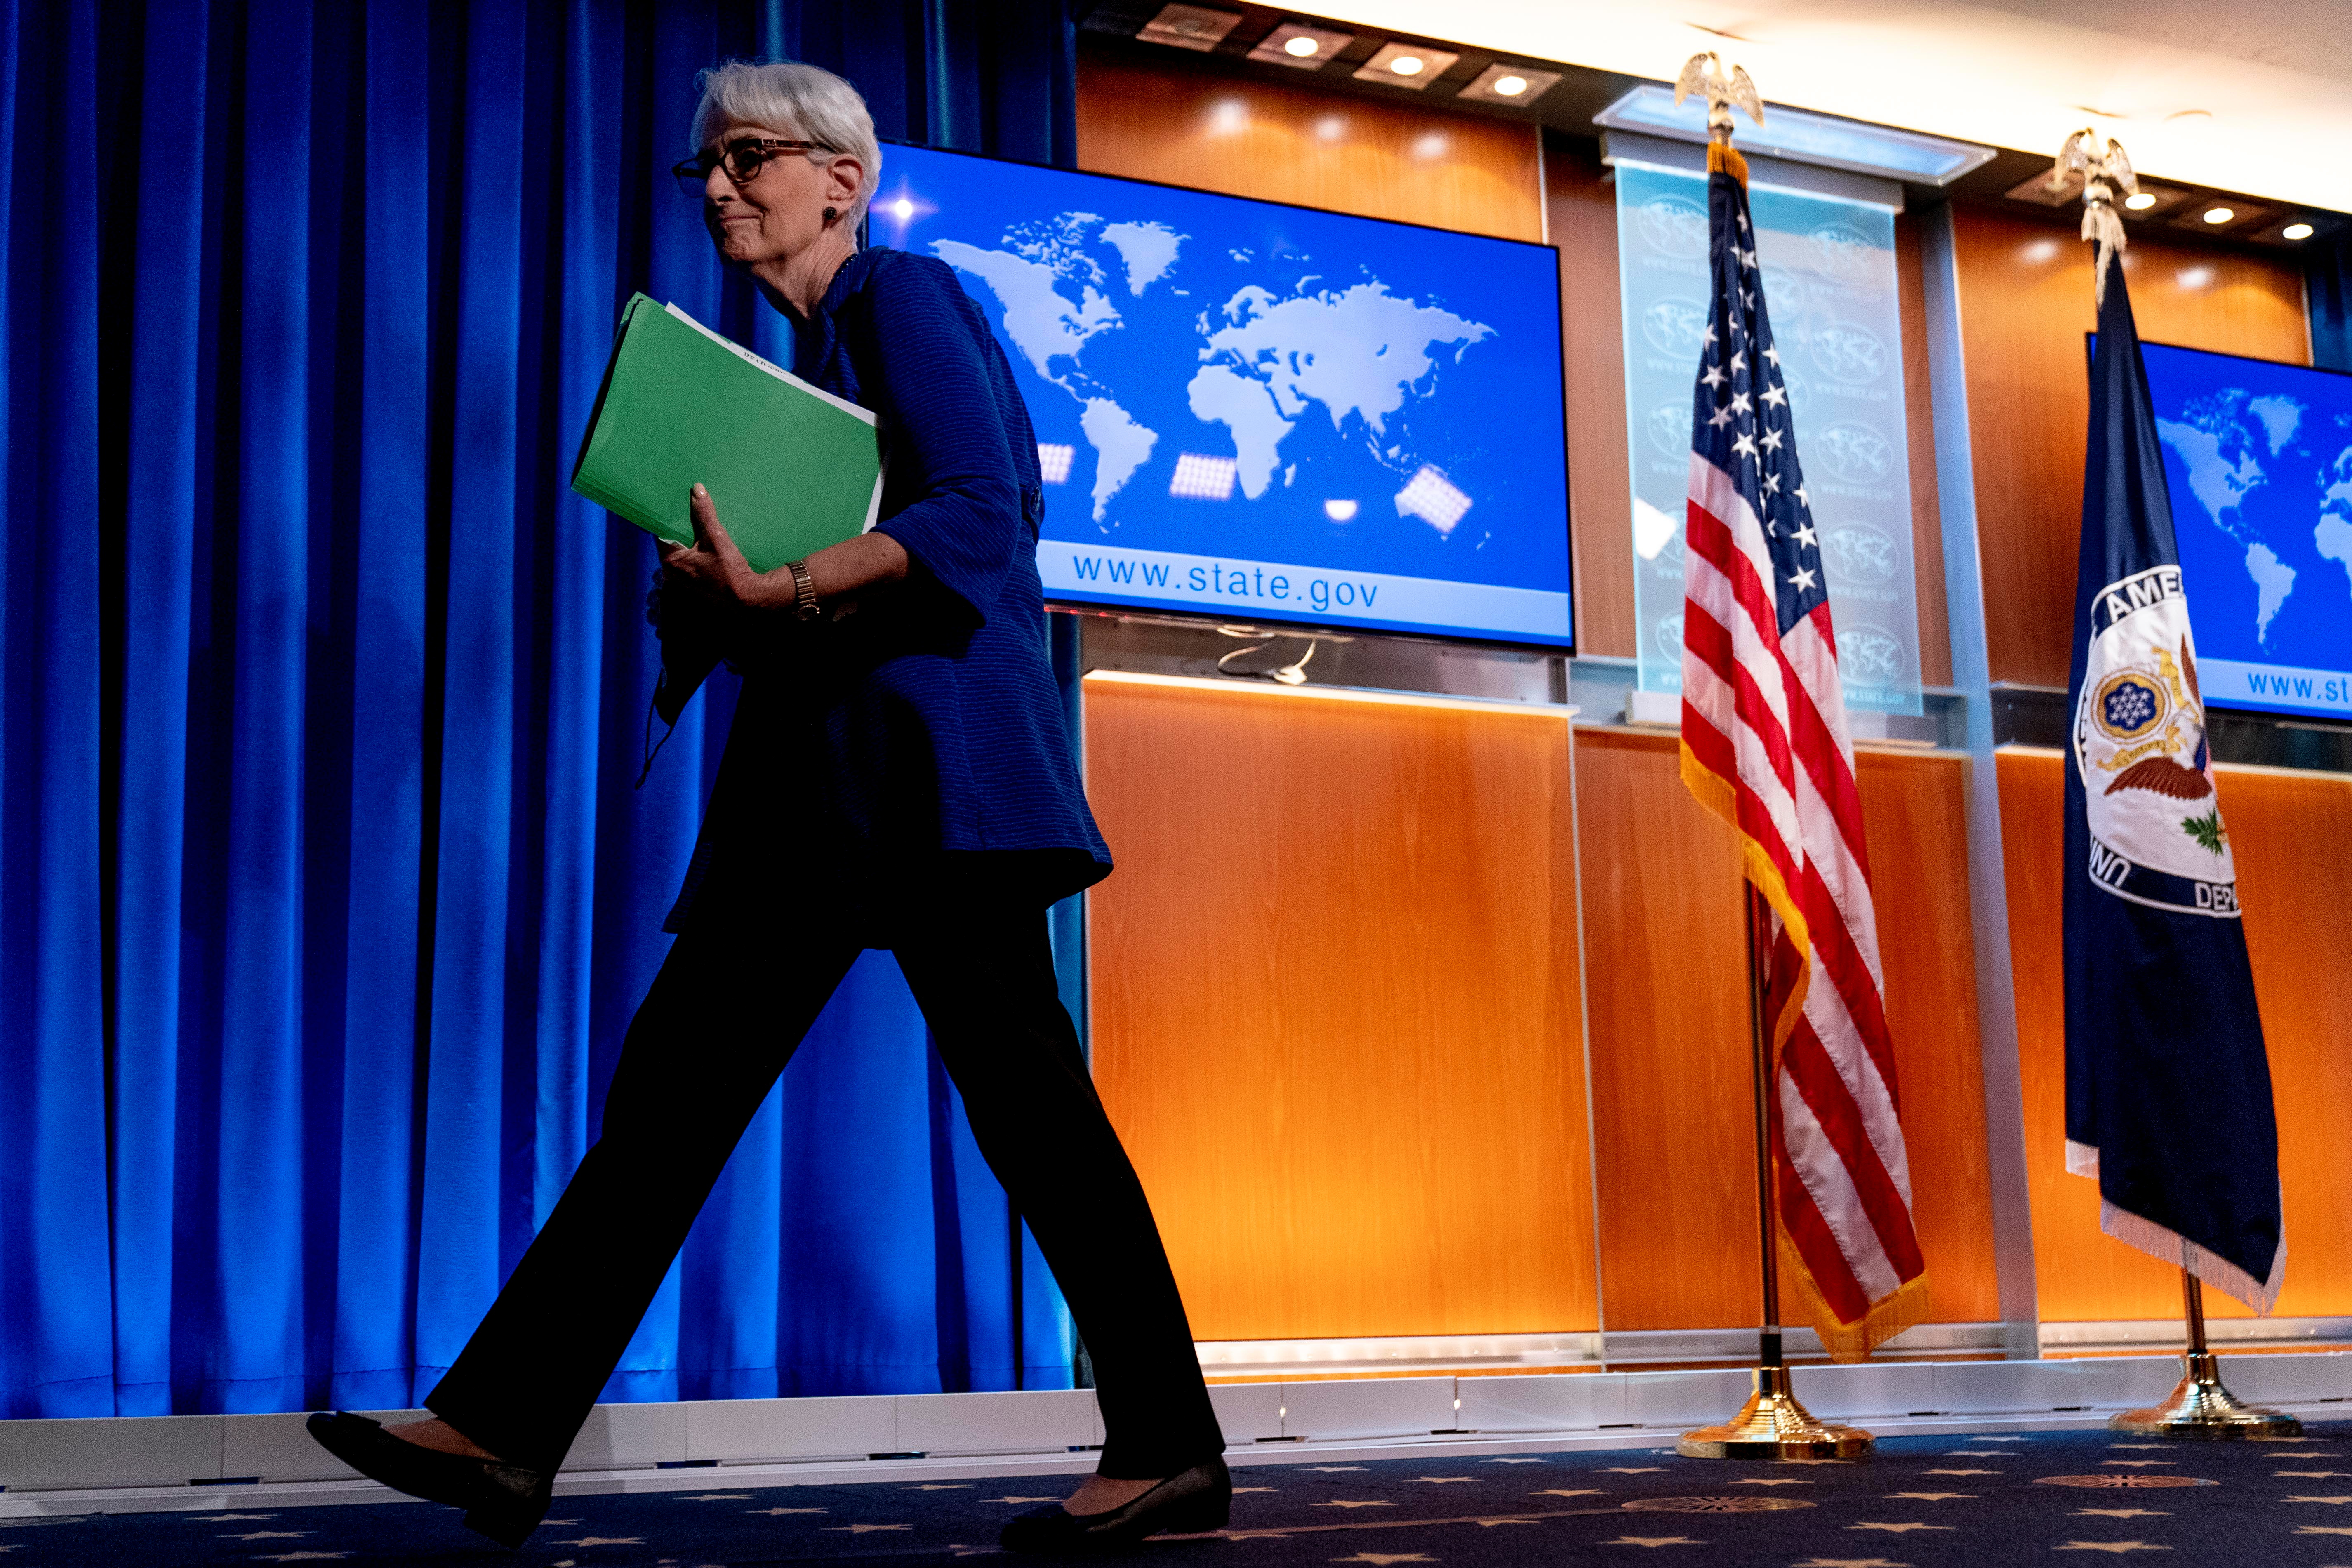 Deputy Secretary of State Wendy Sherman departs after speaking on the situation in Afghanistan at the State Department in Washington, DC, U.S. August 18, 2021. Andrew Harnik/Pool via REUTERS